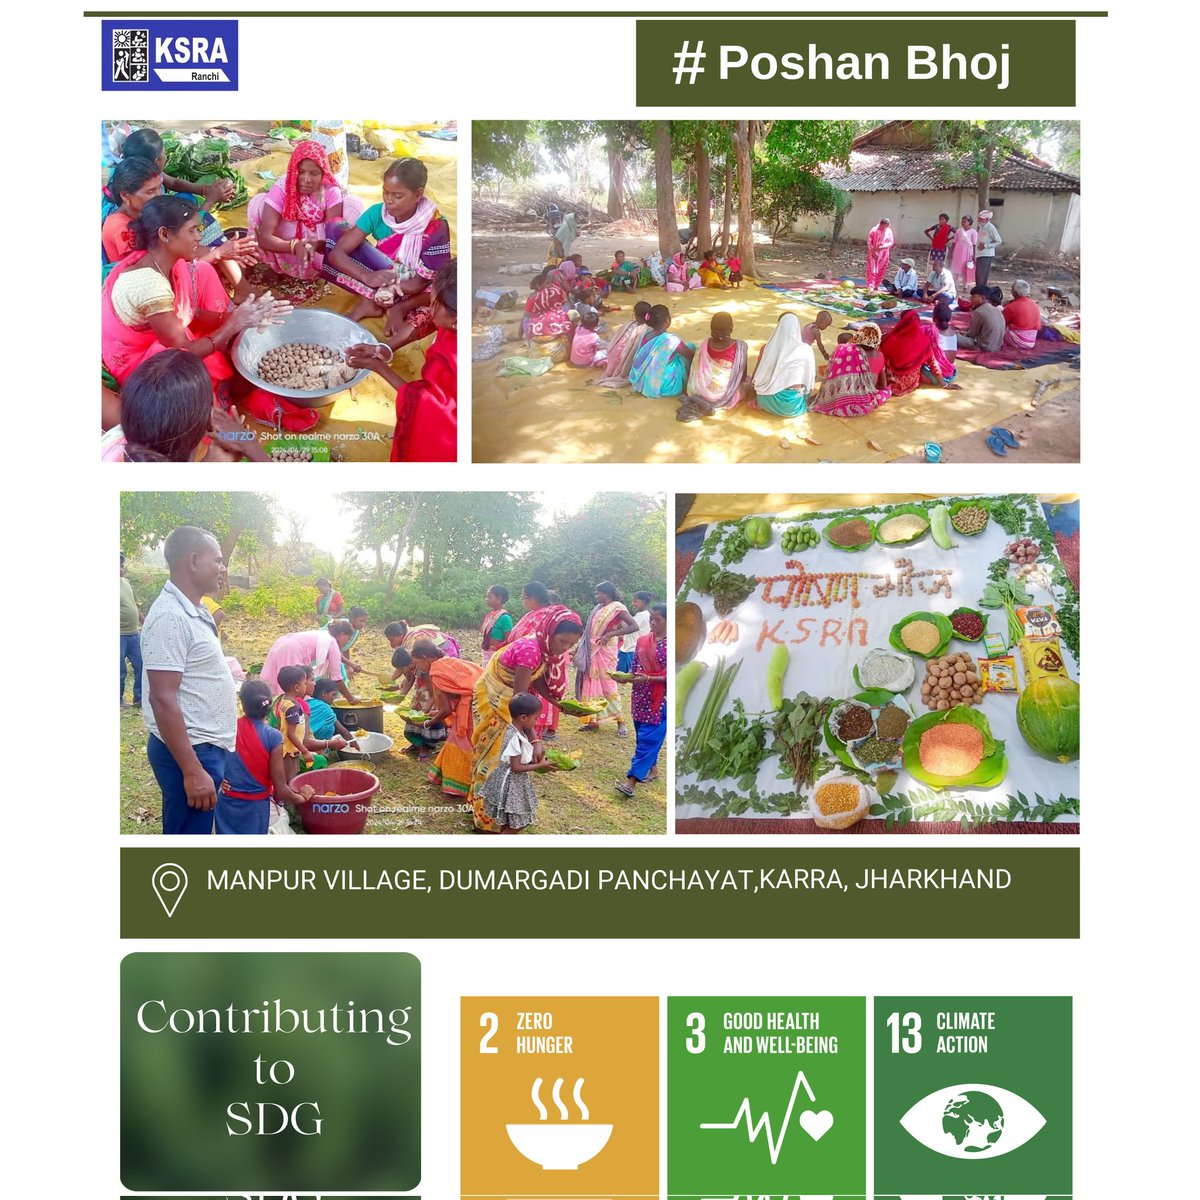 At Manpur Village of #Dumargadi Panchayat, #KSRA facilitated Poshan Bhoj using #locallygrown ingredients to revive #traditional #nutritious #food and well balanced #diet from easily accessible food grain and plants.
Contributing to #sustainabledevelopmentgoals
#SDG2
#SDG3
#SDG13